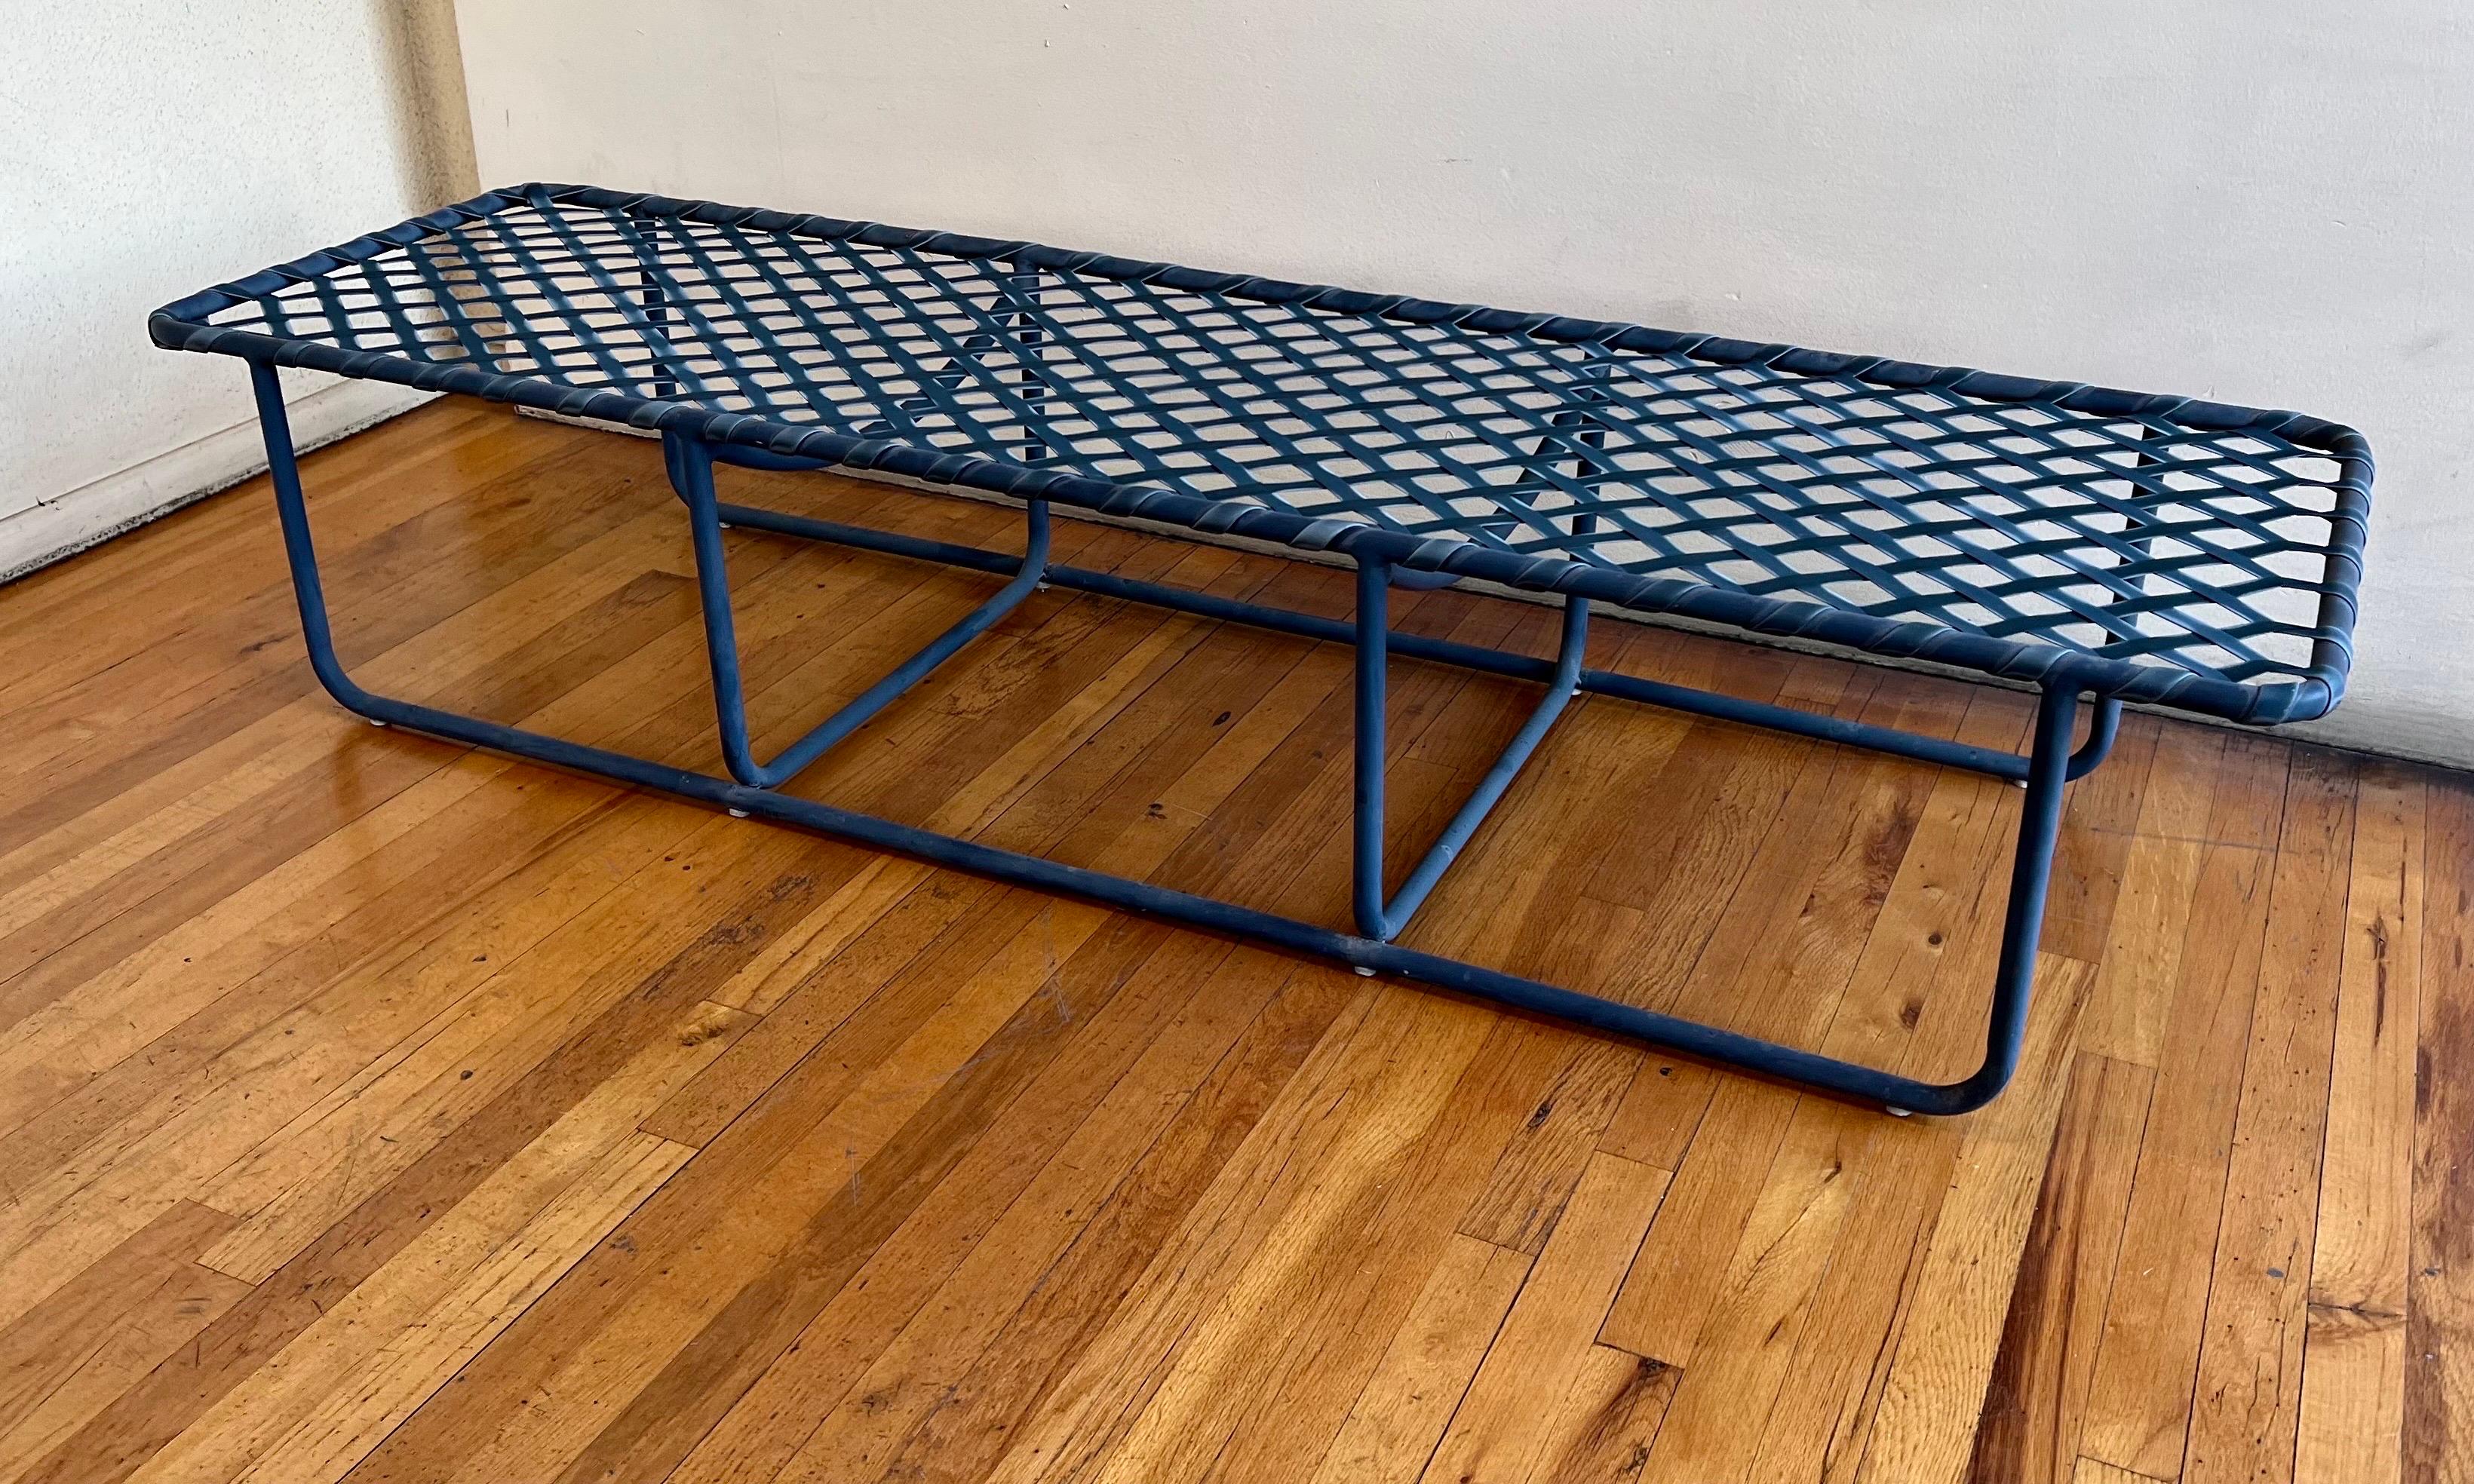 Rare Brown Jordan bench was designed by Tadao Inouye in the 1960s. All in its original condition a hard-to-find piece all original very clean original plastic feet and straps very light wear considering age. in Navy Blue Finish.